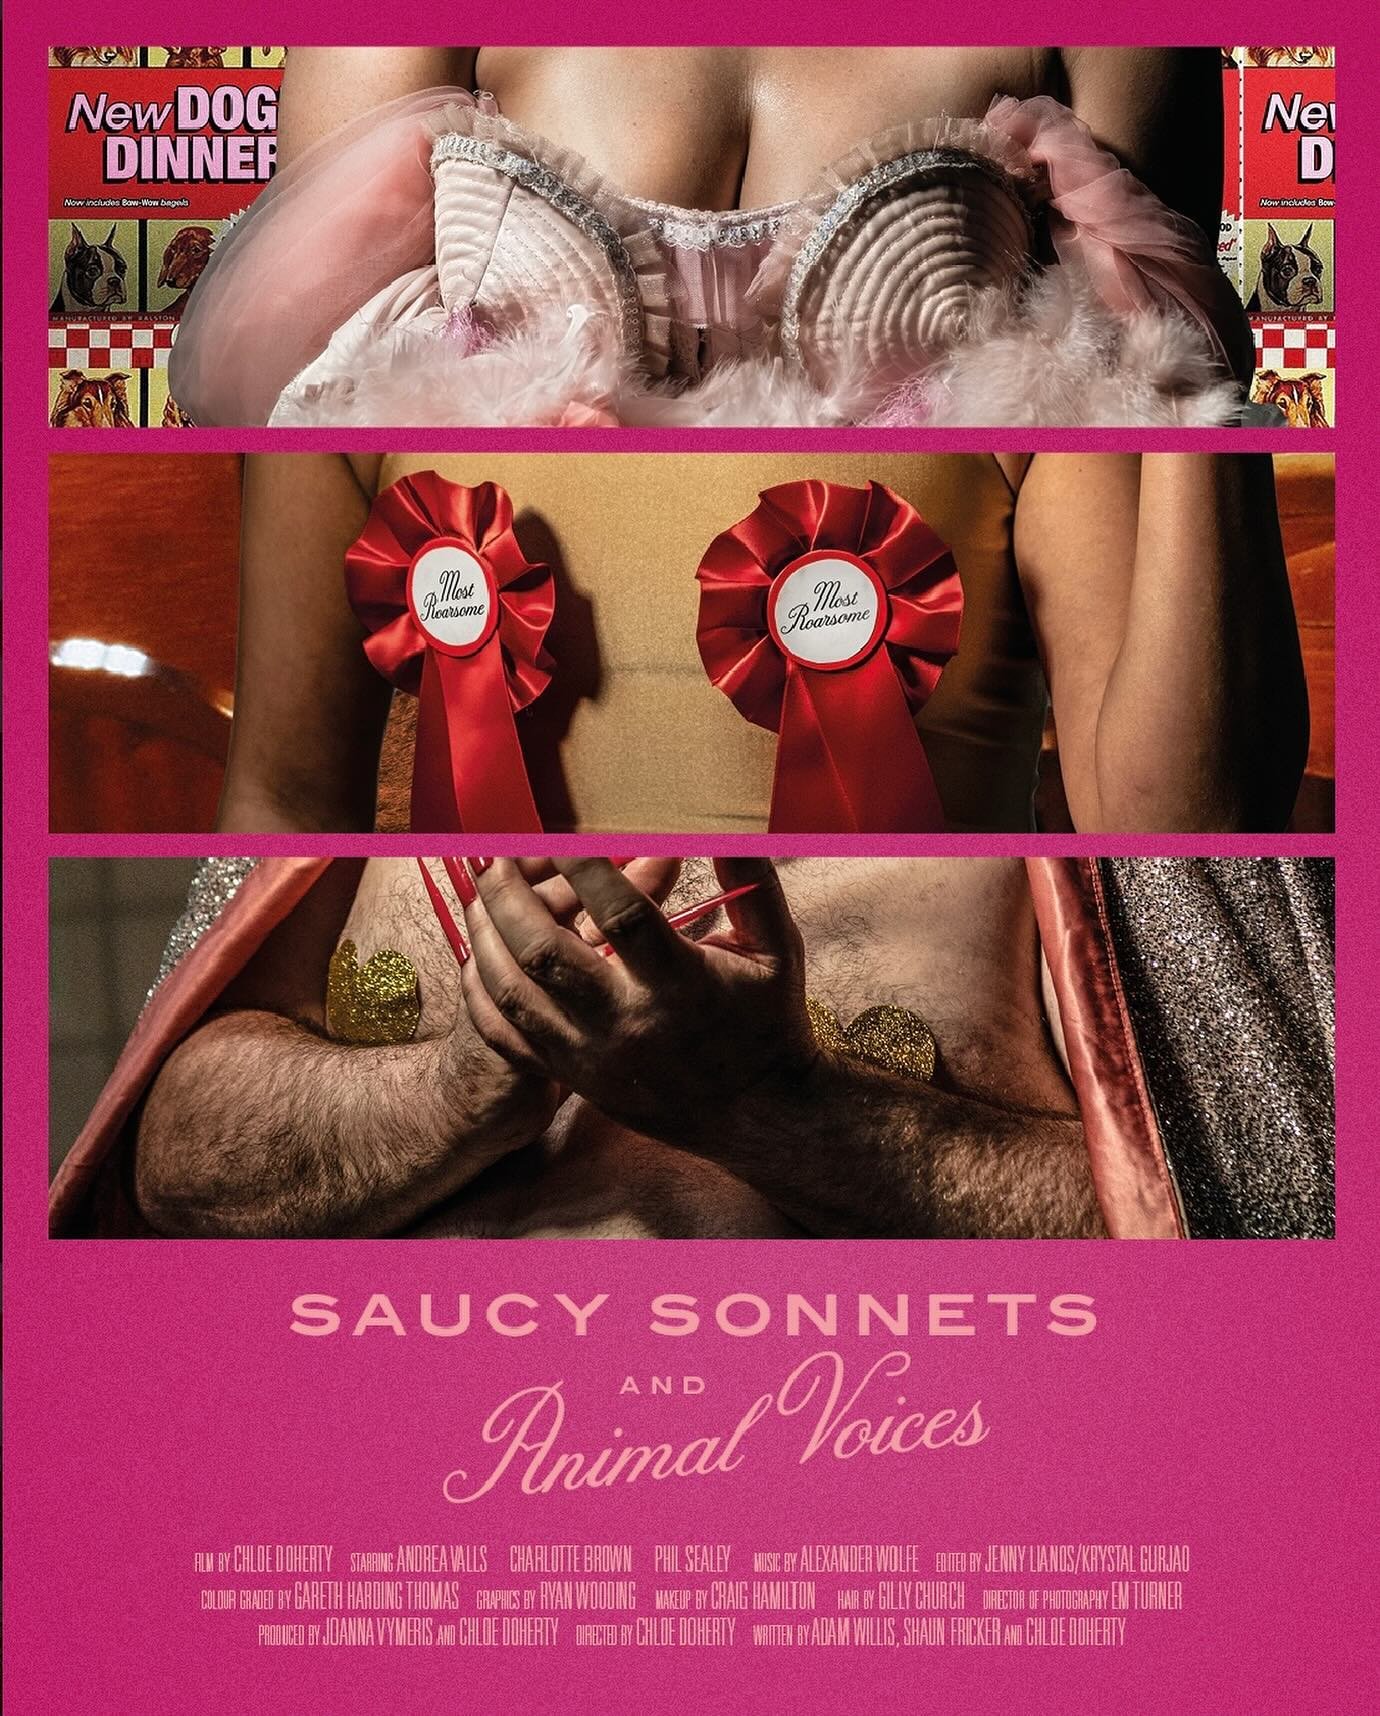 &lsquo;Saucy Sonnets and Animal Voices&rsquo; coming soon 💕 Special thanks to @rwooding for the poster design and @rahpetherbridgephotography for the gorgeous photography! 🐾

CREDITS 🎥
Director: @chlodoh
1st AD: @jvymeris
Writers: @chlodoh @shaun_